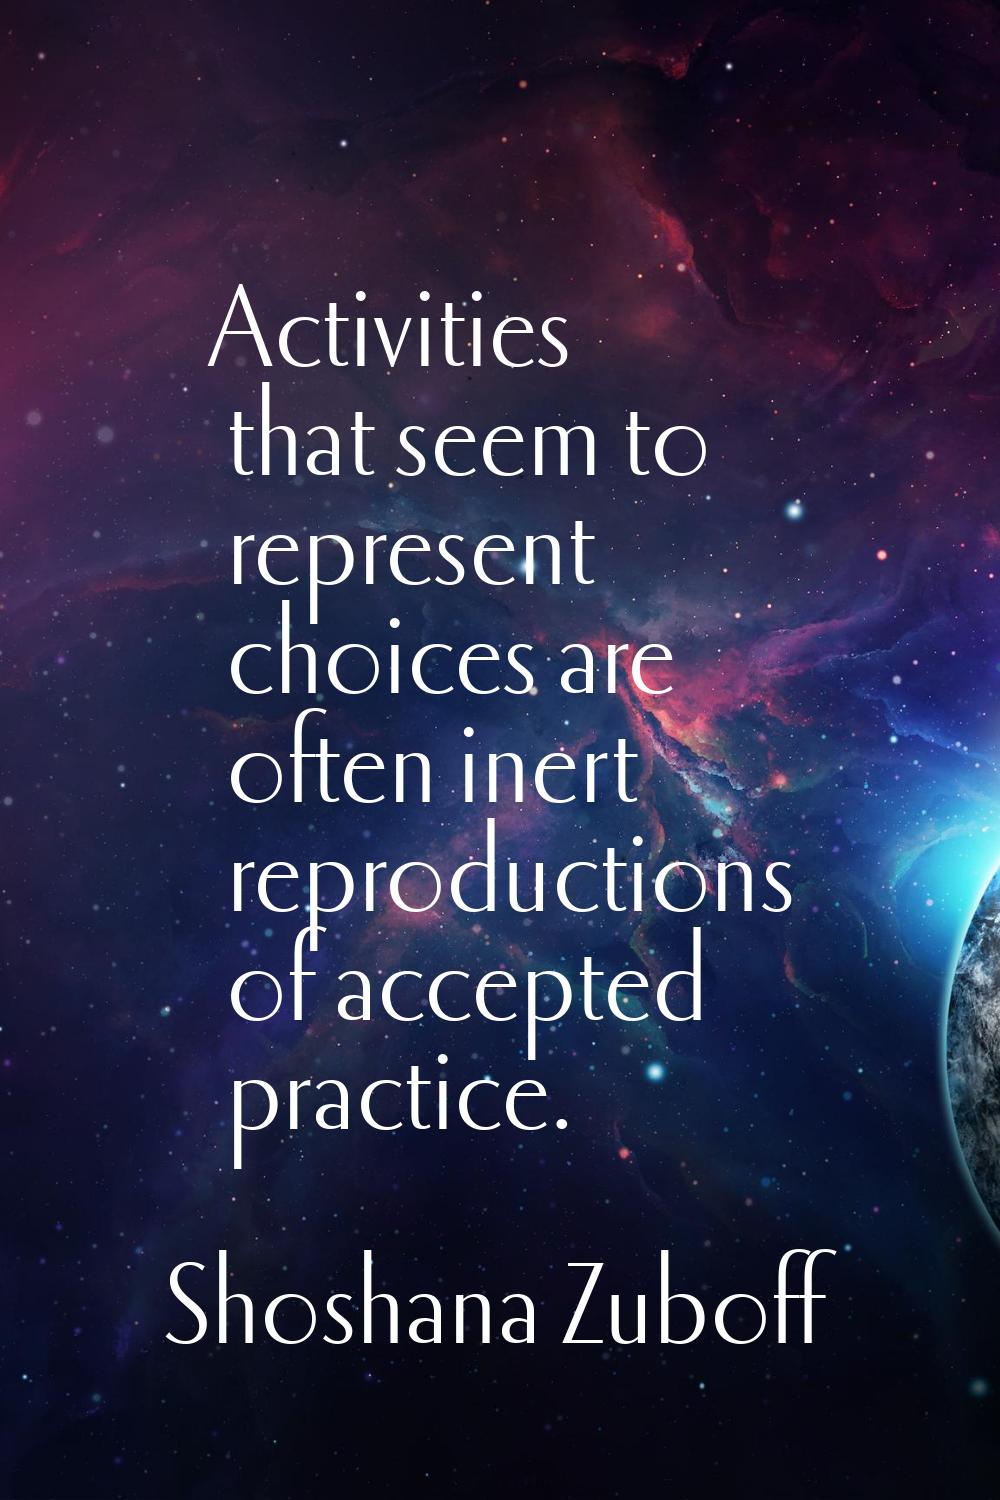 Activities that seem to represent choices are often inert reproductions of accepted practice.